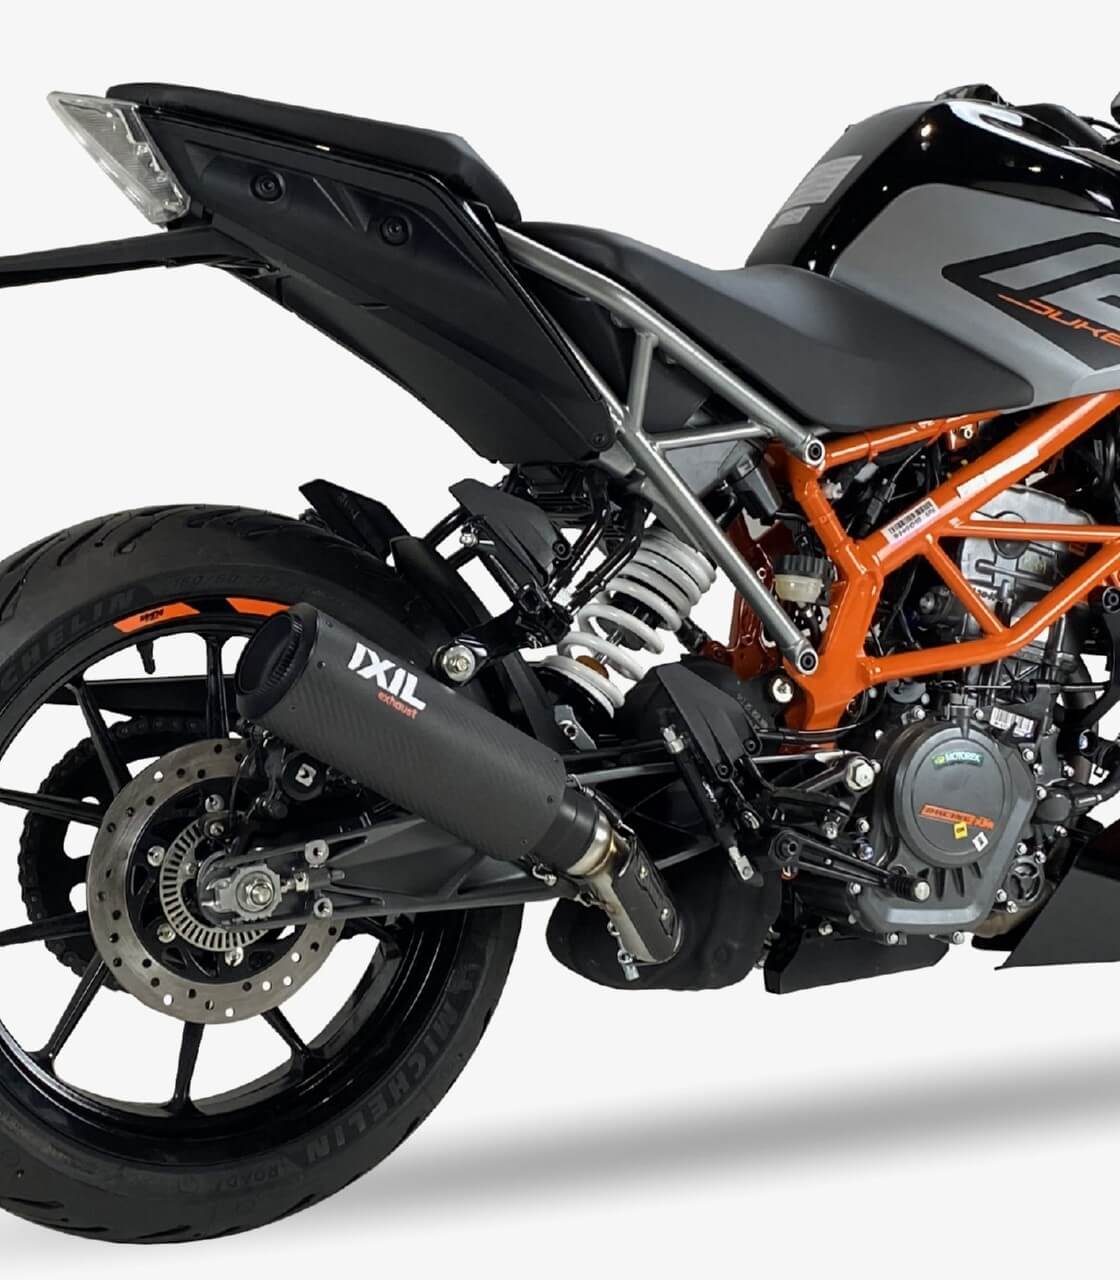 BS6 KTM Duke 125 facelift launched in India